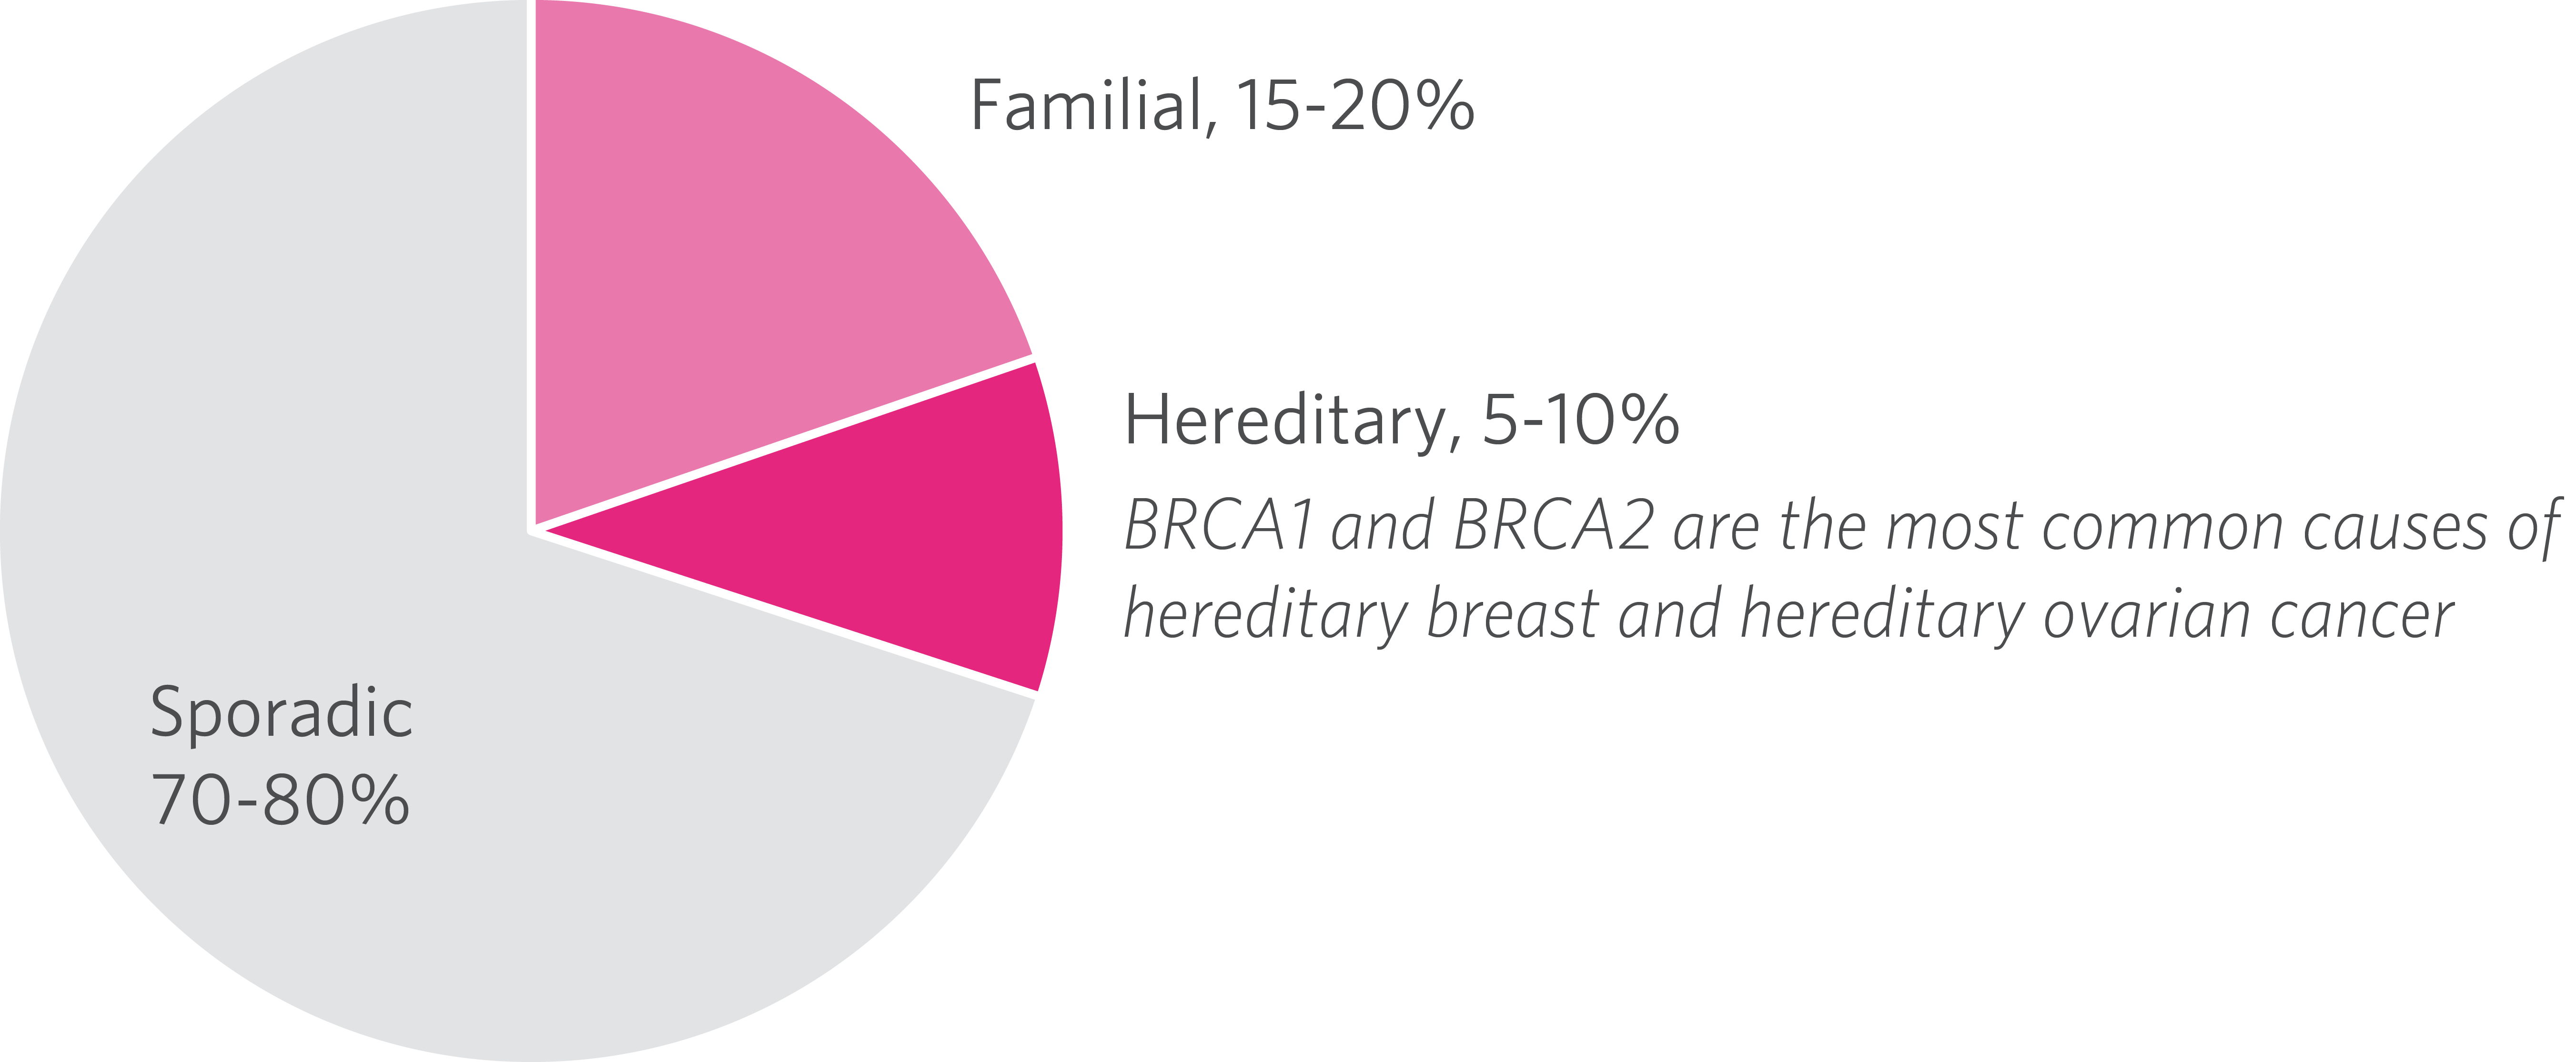 Cancer sporadic familial hereditary Cancer genetic percentage